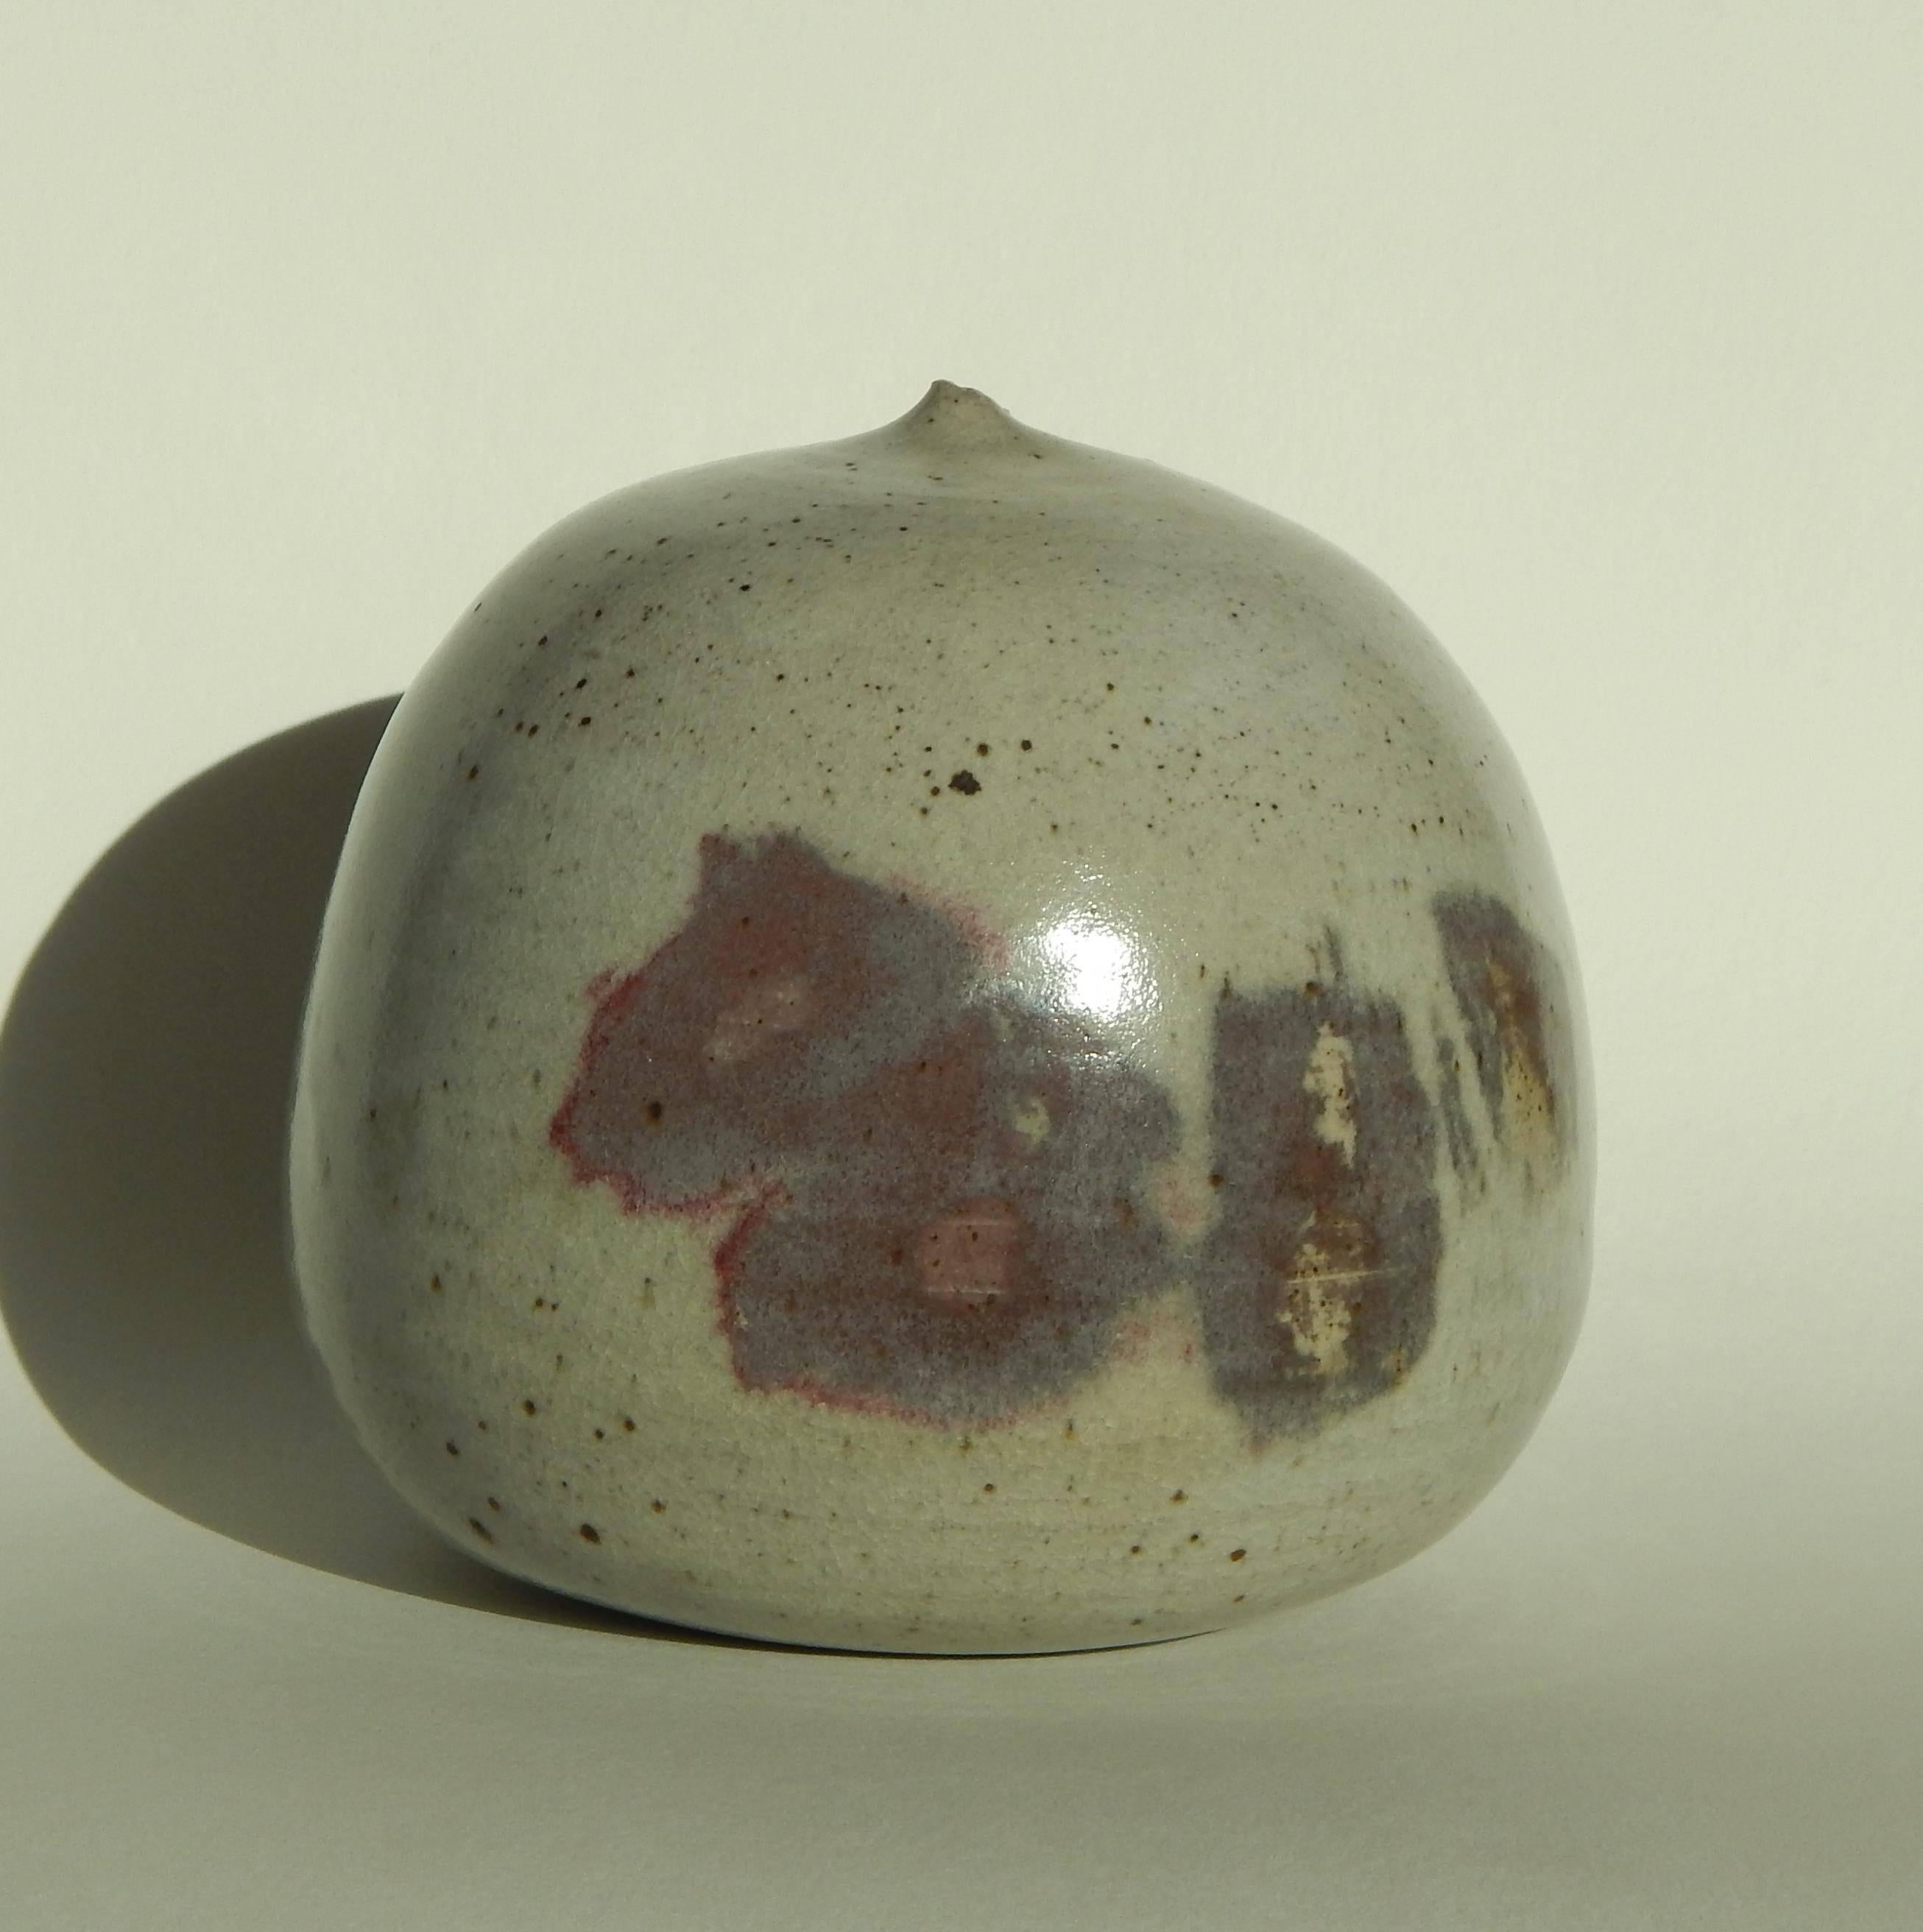 This beautiful moon pot with rattle is glazed in a serene grey with accents of mauve and rose.
It measures 6.25